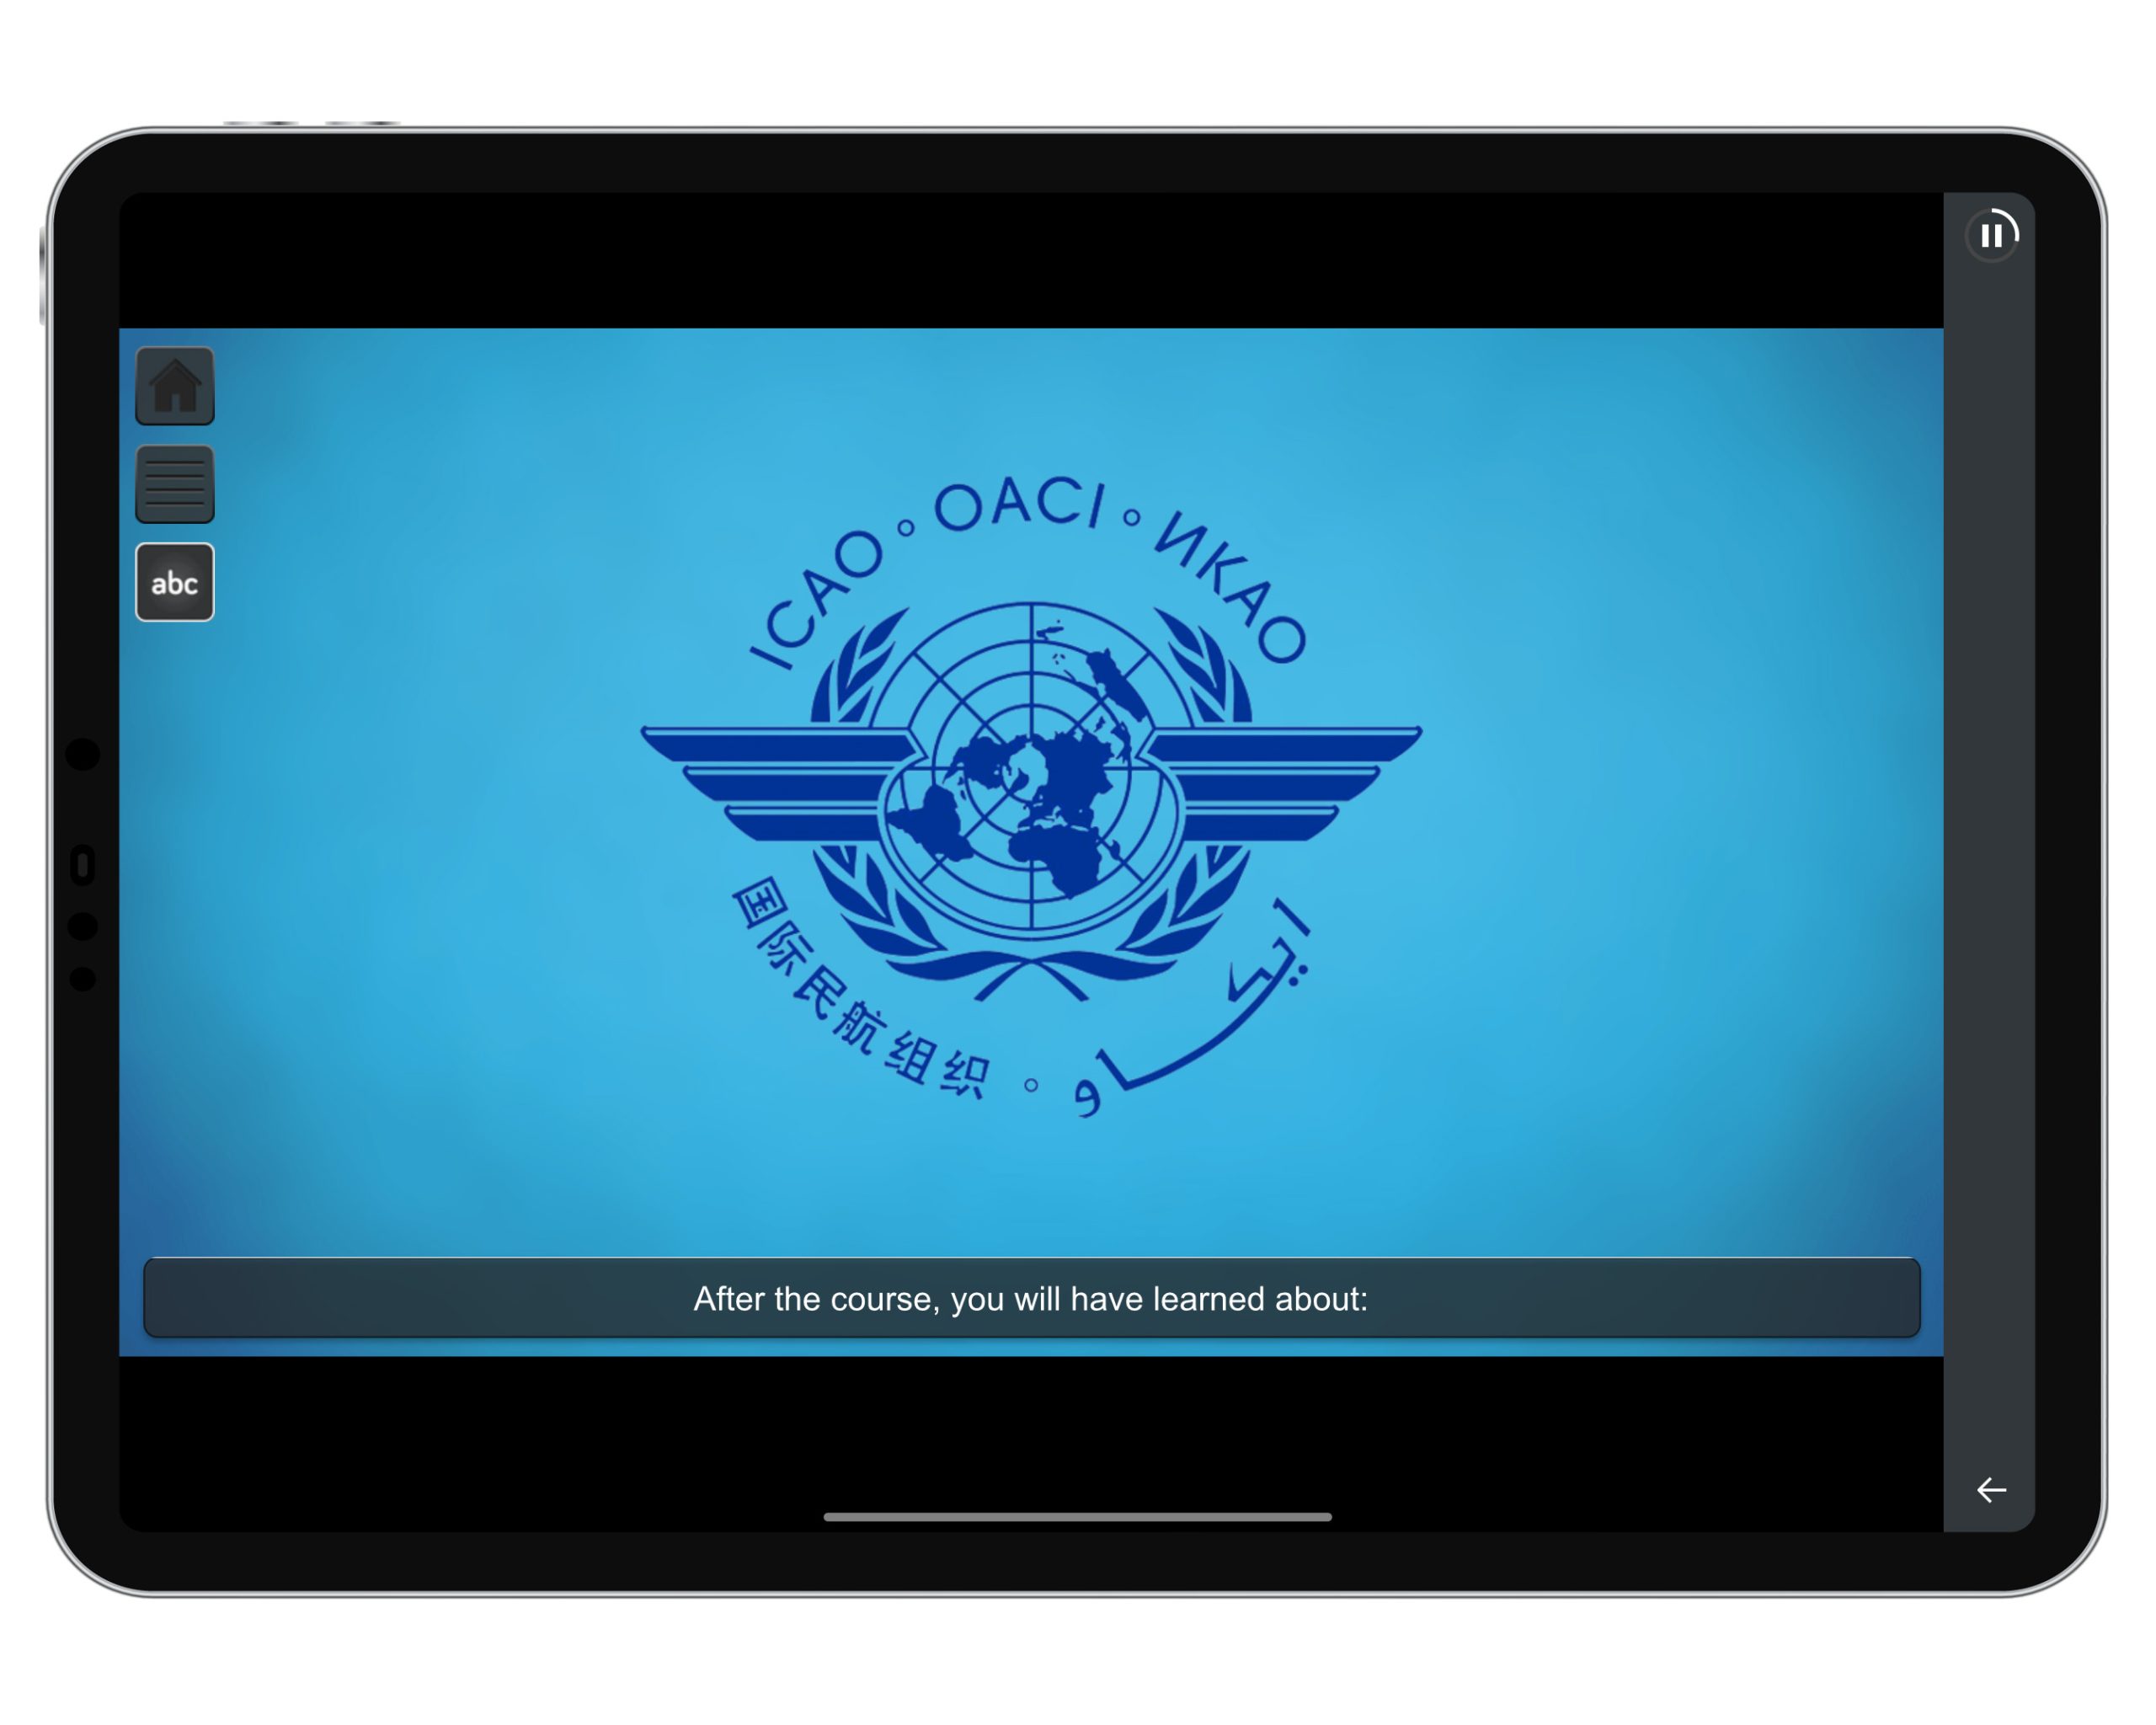 Screenshot showing Security Awareness course for the airline flight crew, cabin crew and security staff.